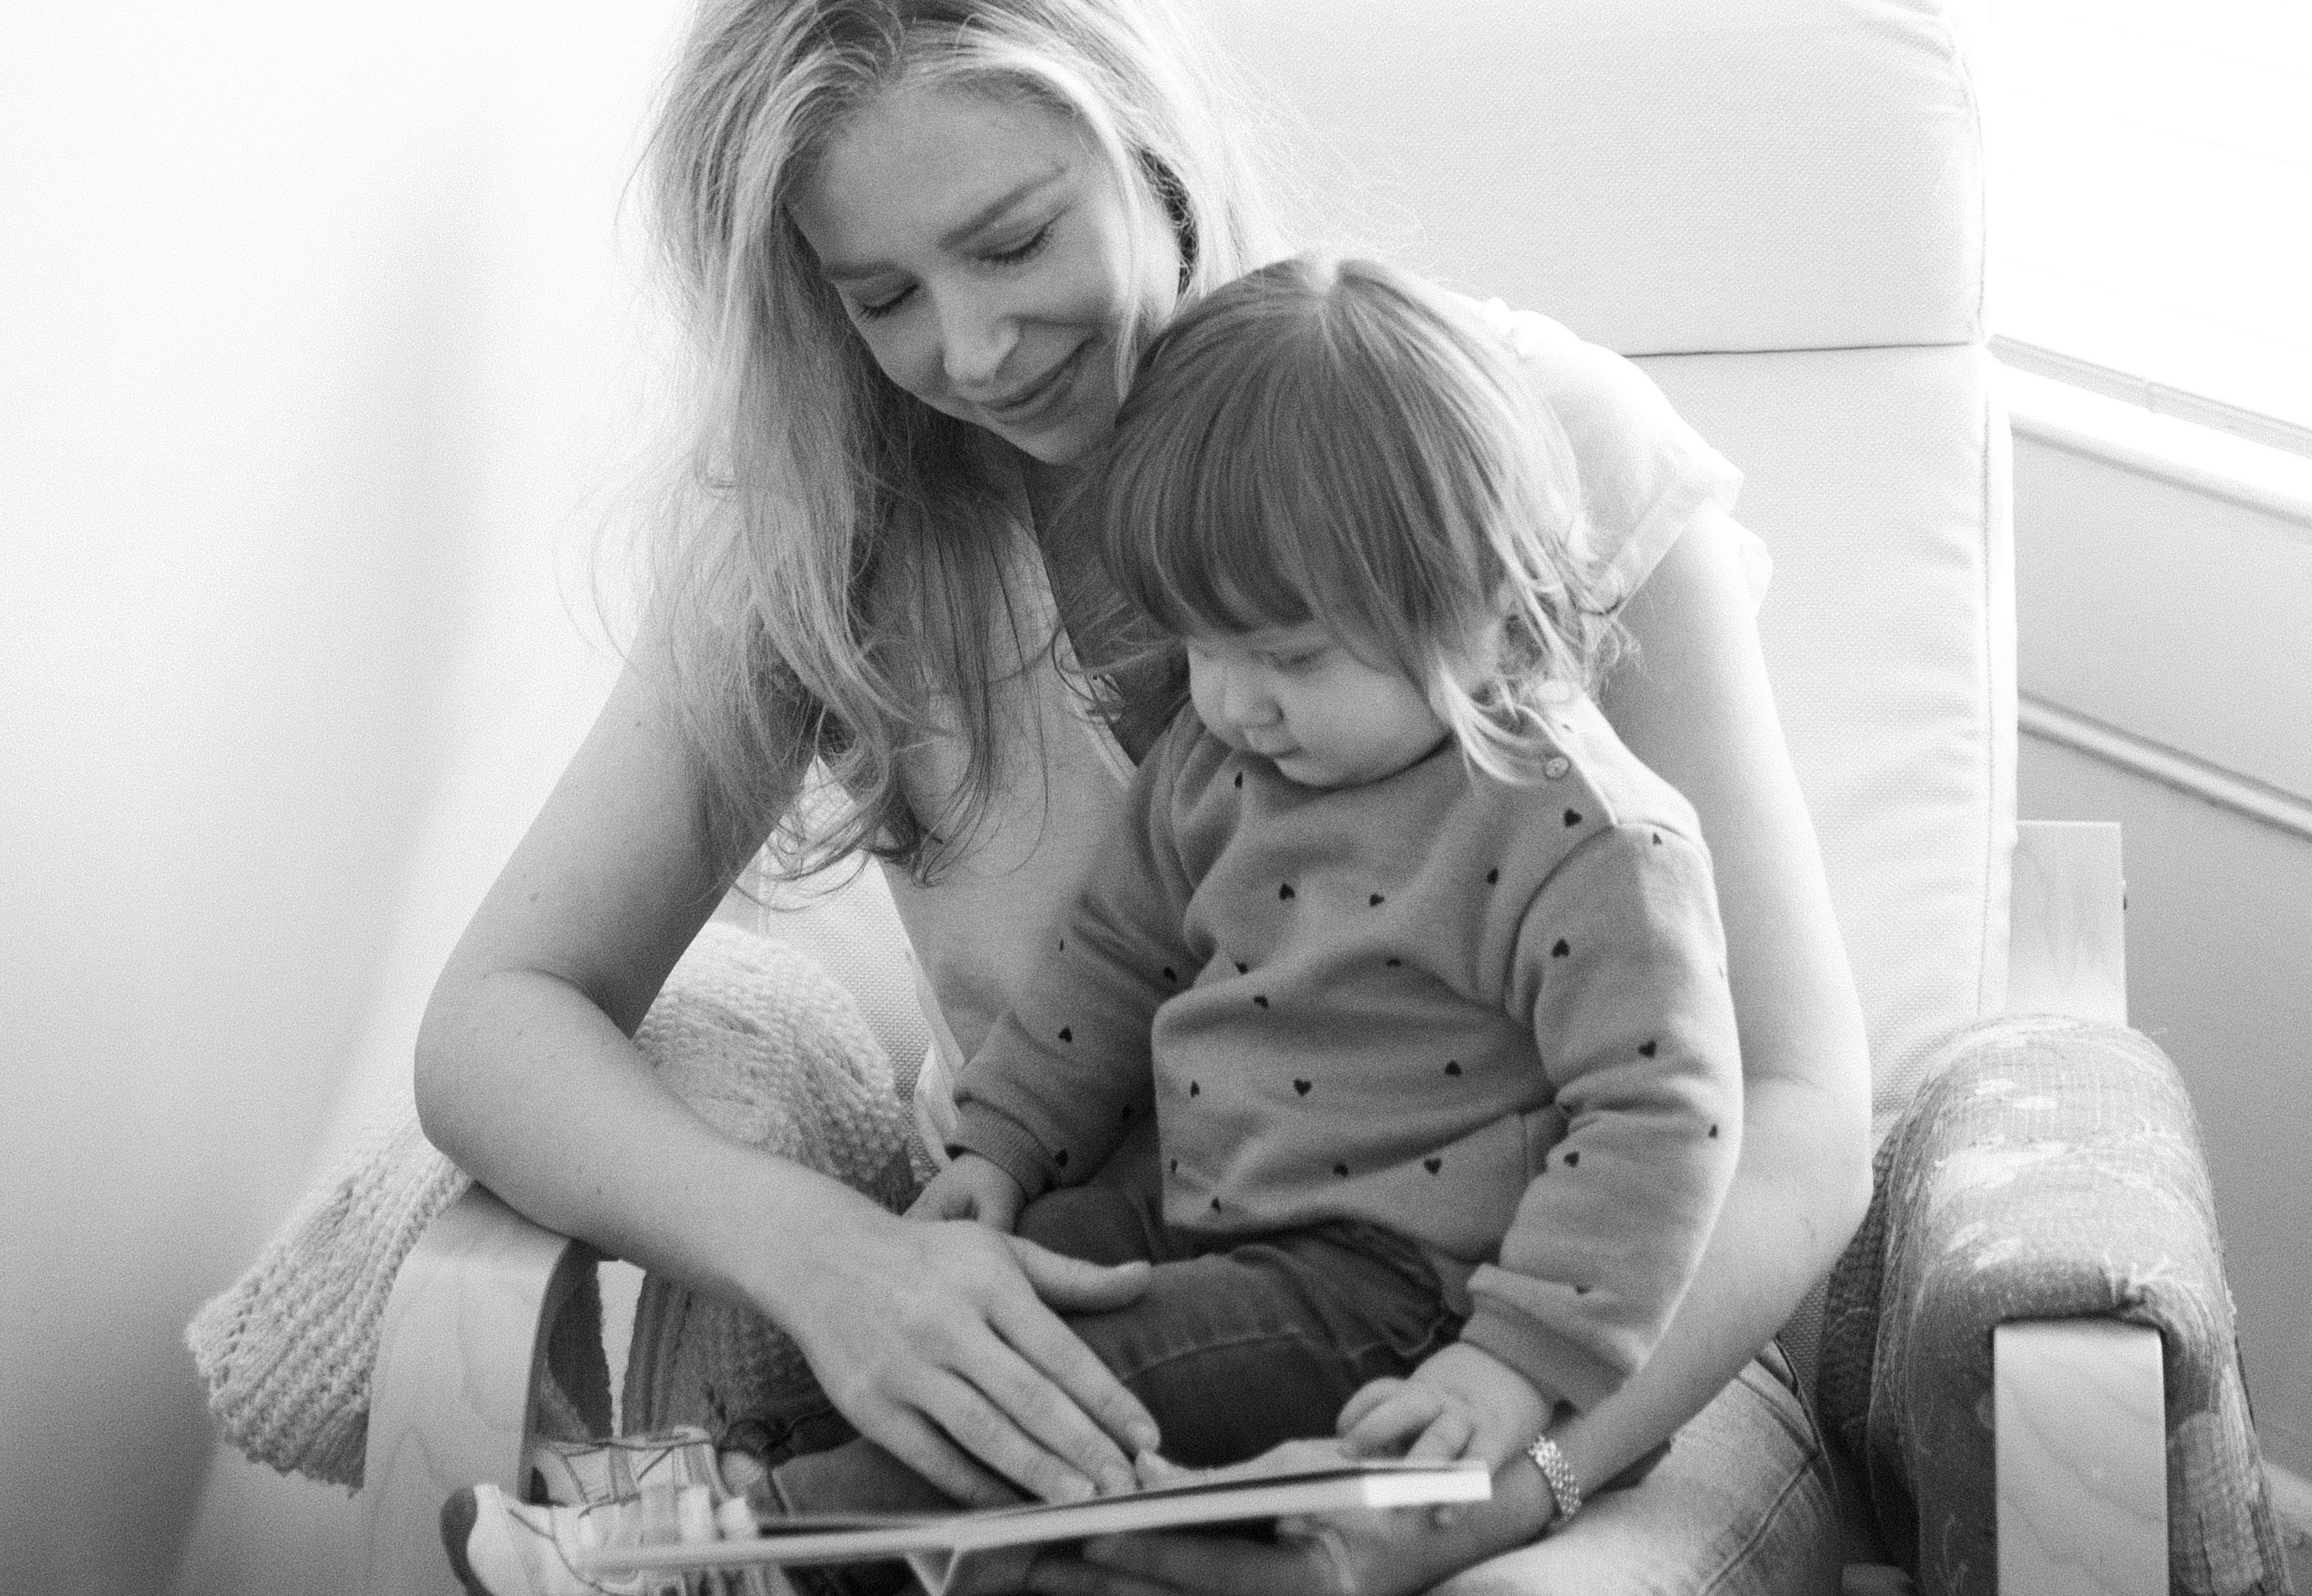 mother and child reading